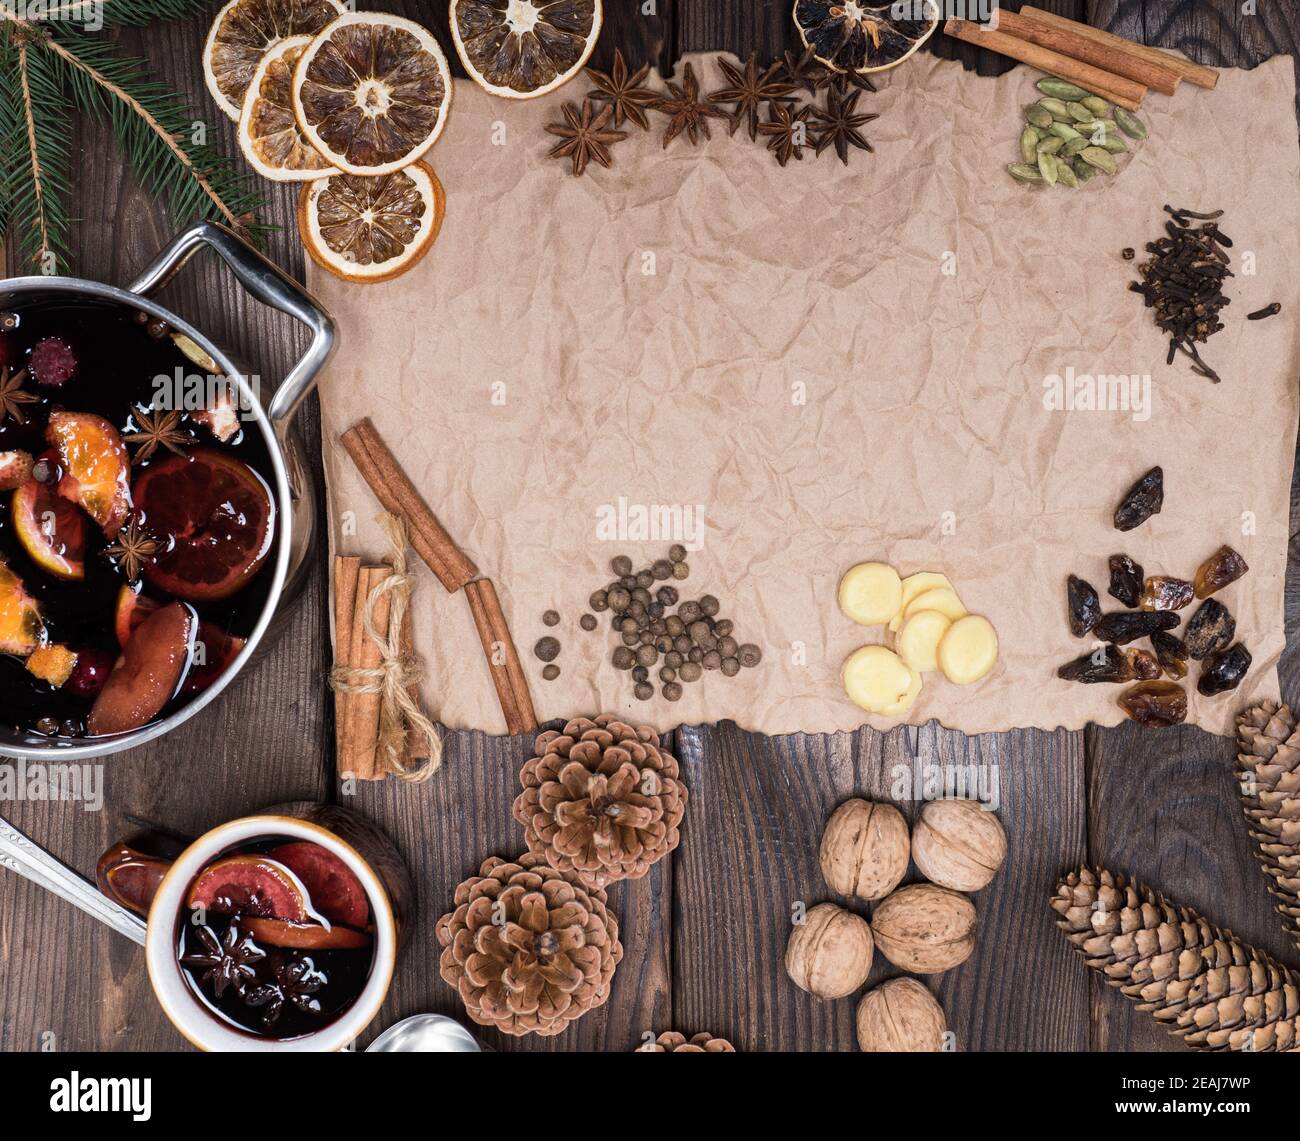 ingredients for making mulled wine on a wooden table and a piece of brown paper Stock Photo